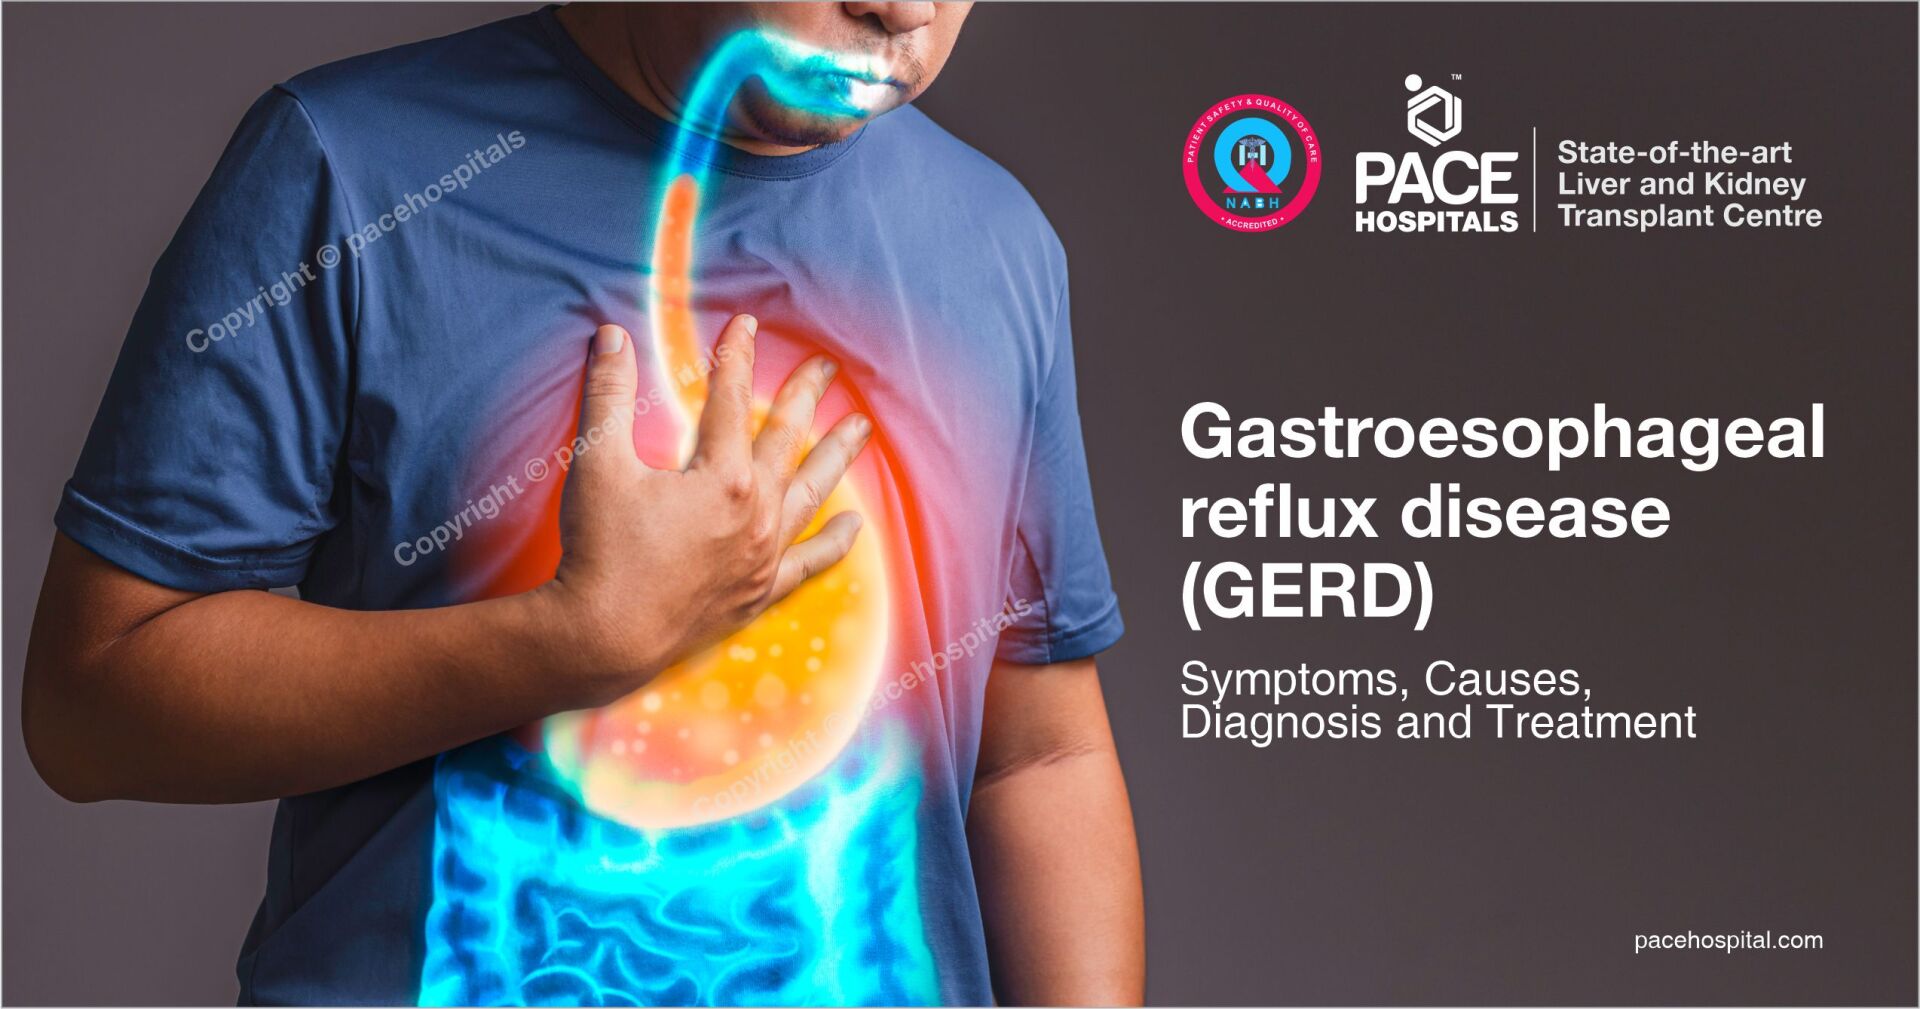 GERD (Gastroesophageal reflux disease) - Symptoms, Causes, Diagnosis and Treatment